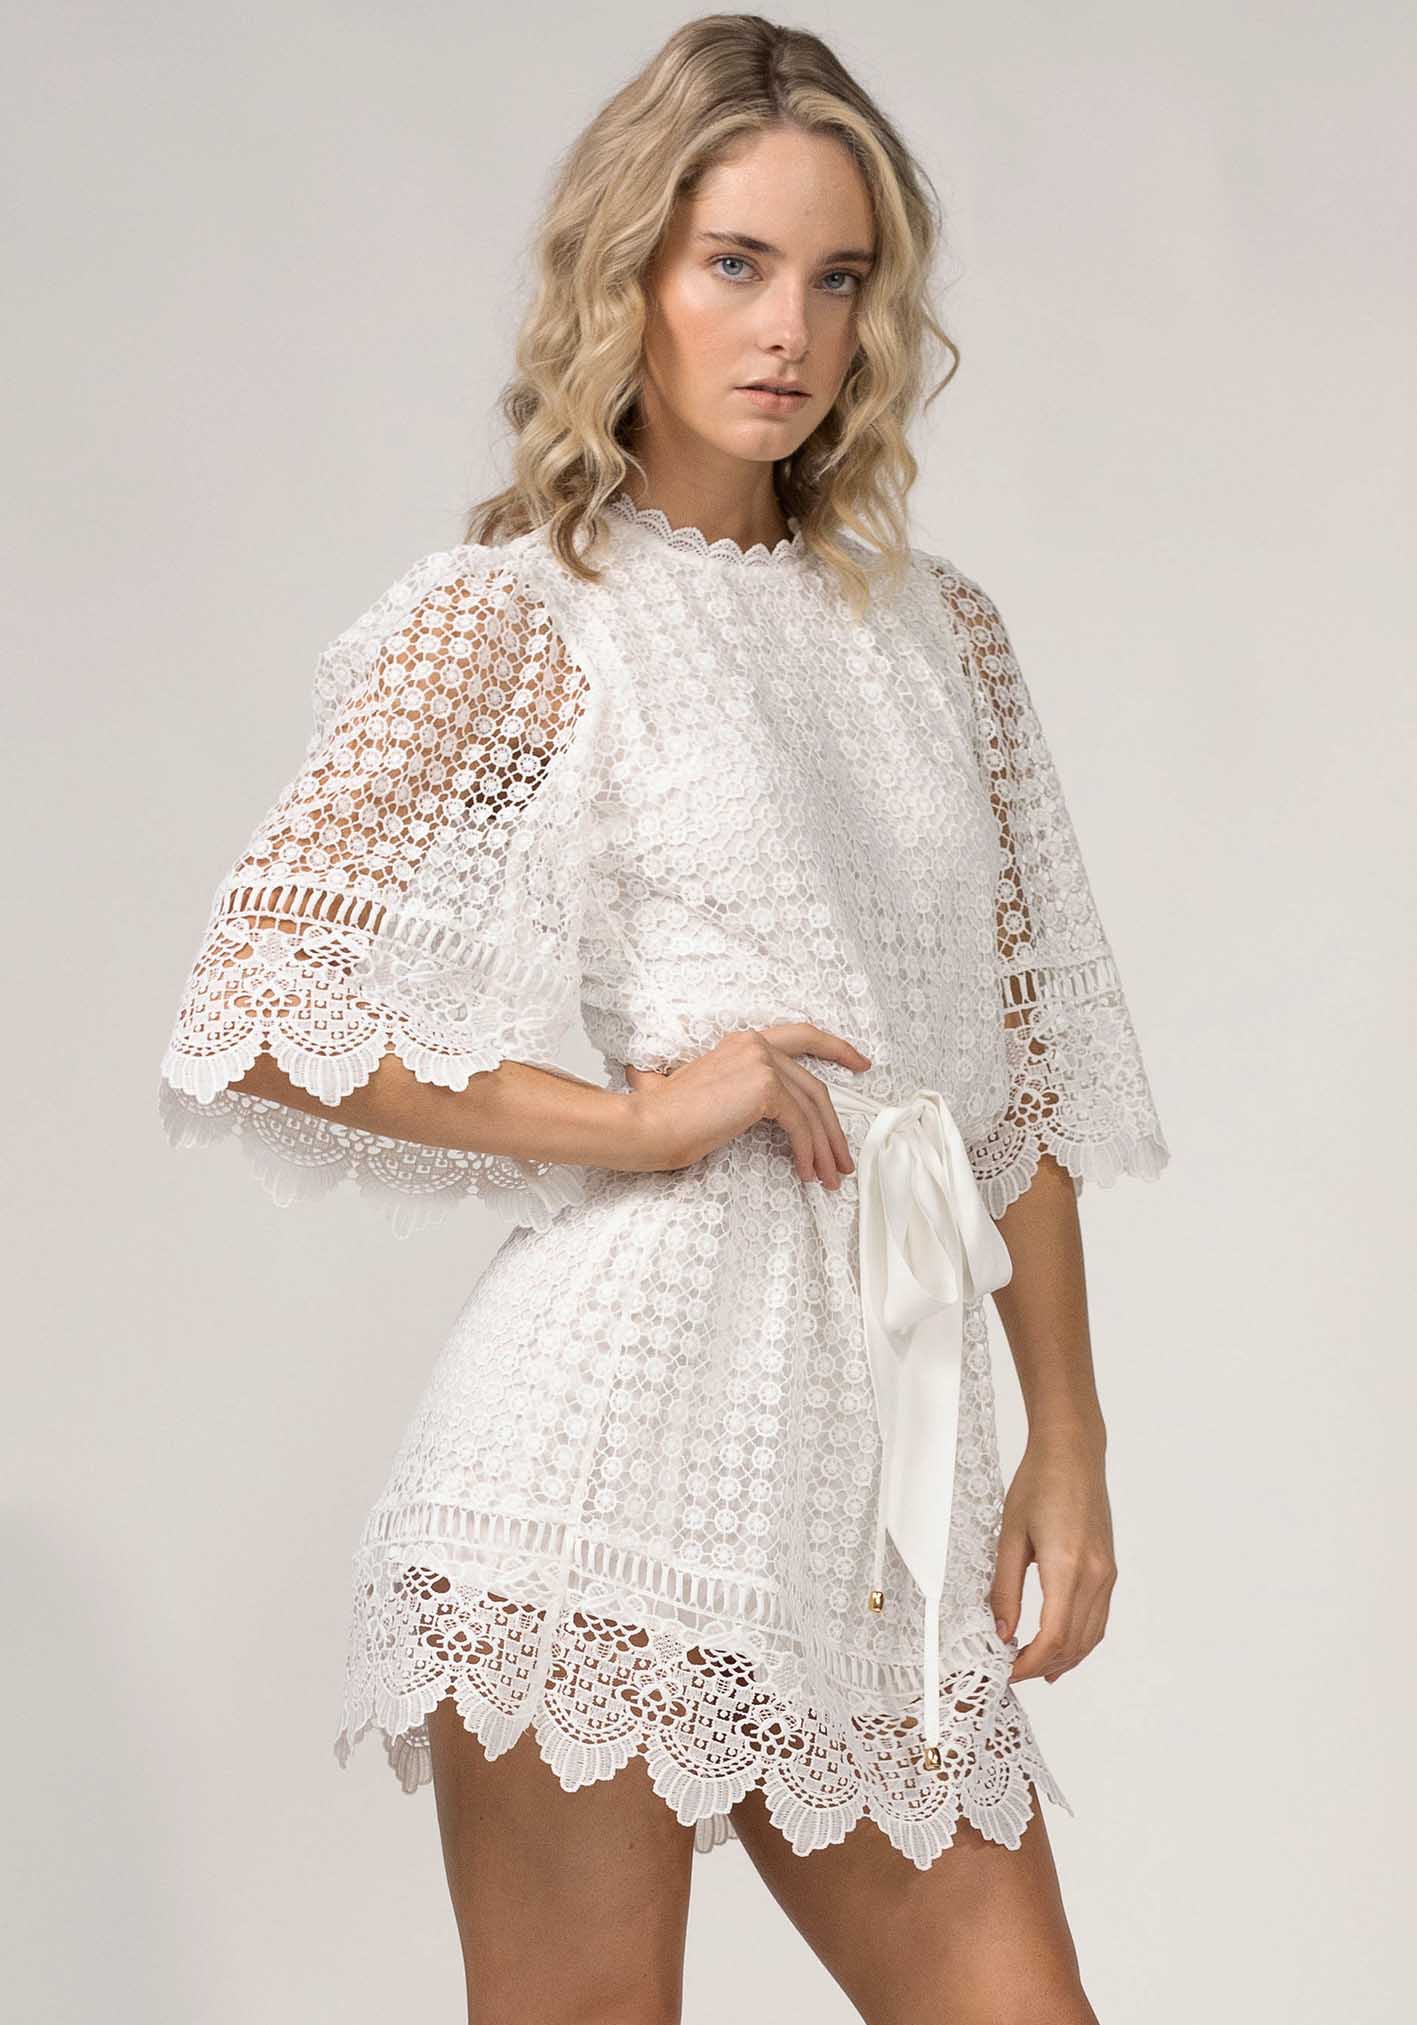 Moment by Moment Lace Dress | White Lace Dress by Three of Something Australia